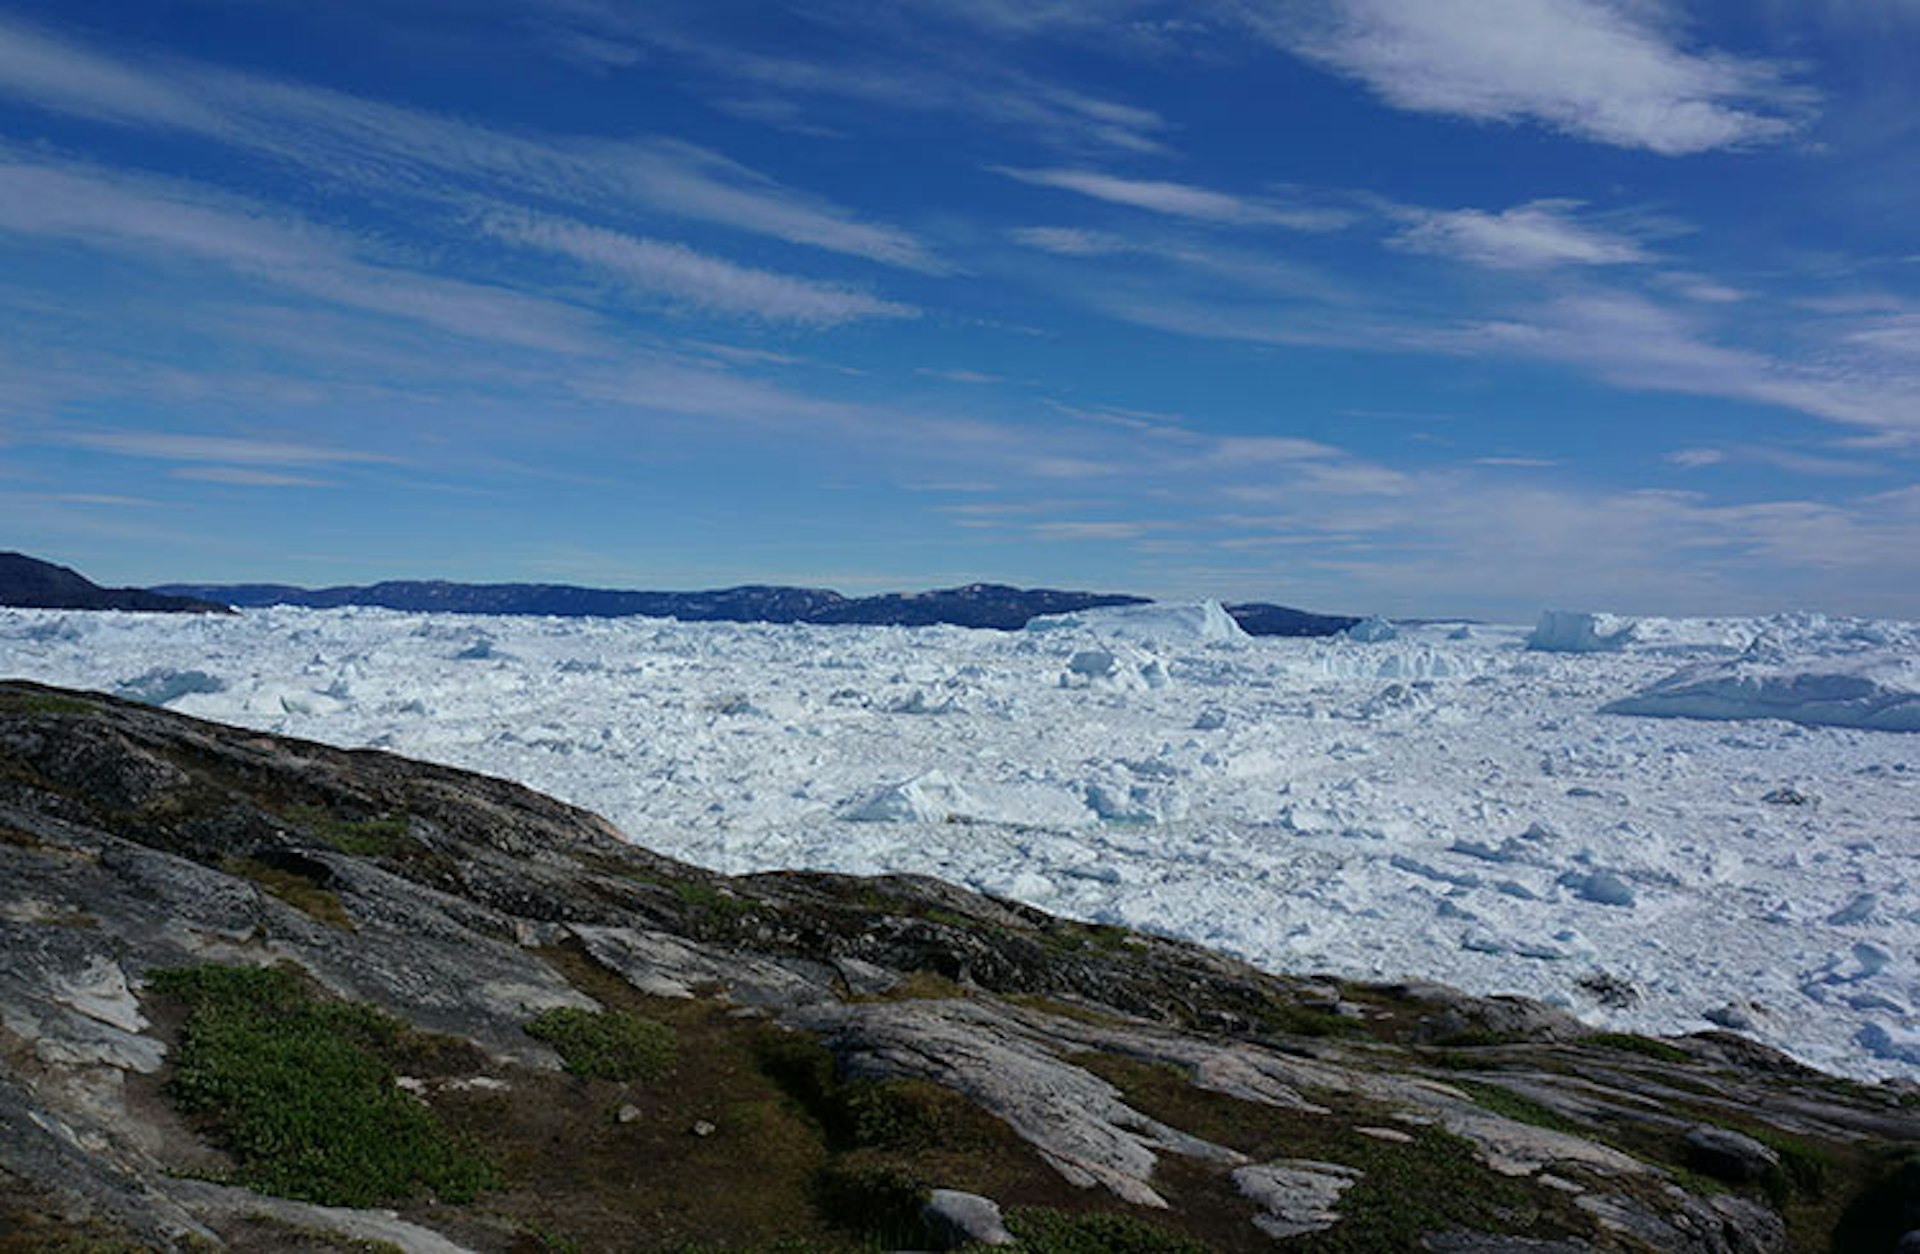 A vast expanse of ice, the Jakobshavn Glacier, stretches out under a blue sky, with a rocky, moss-covered hiking trail in the foreground